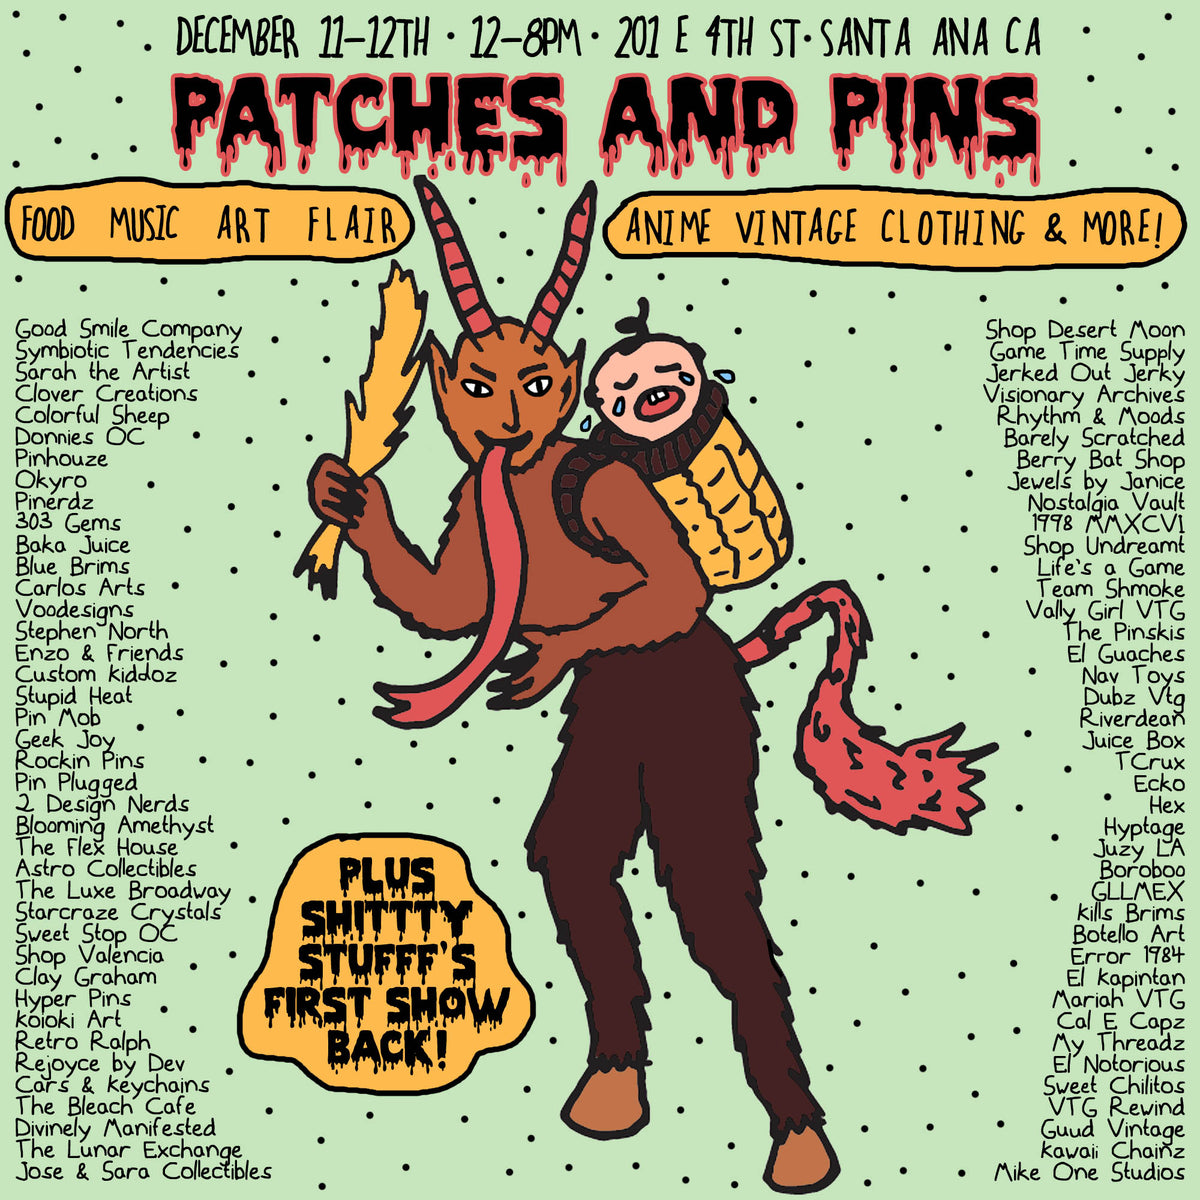 DEC 11-12, 2021 // PATCHES & PINS EXPO